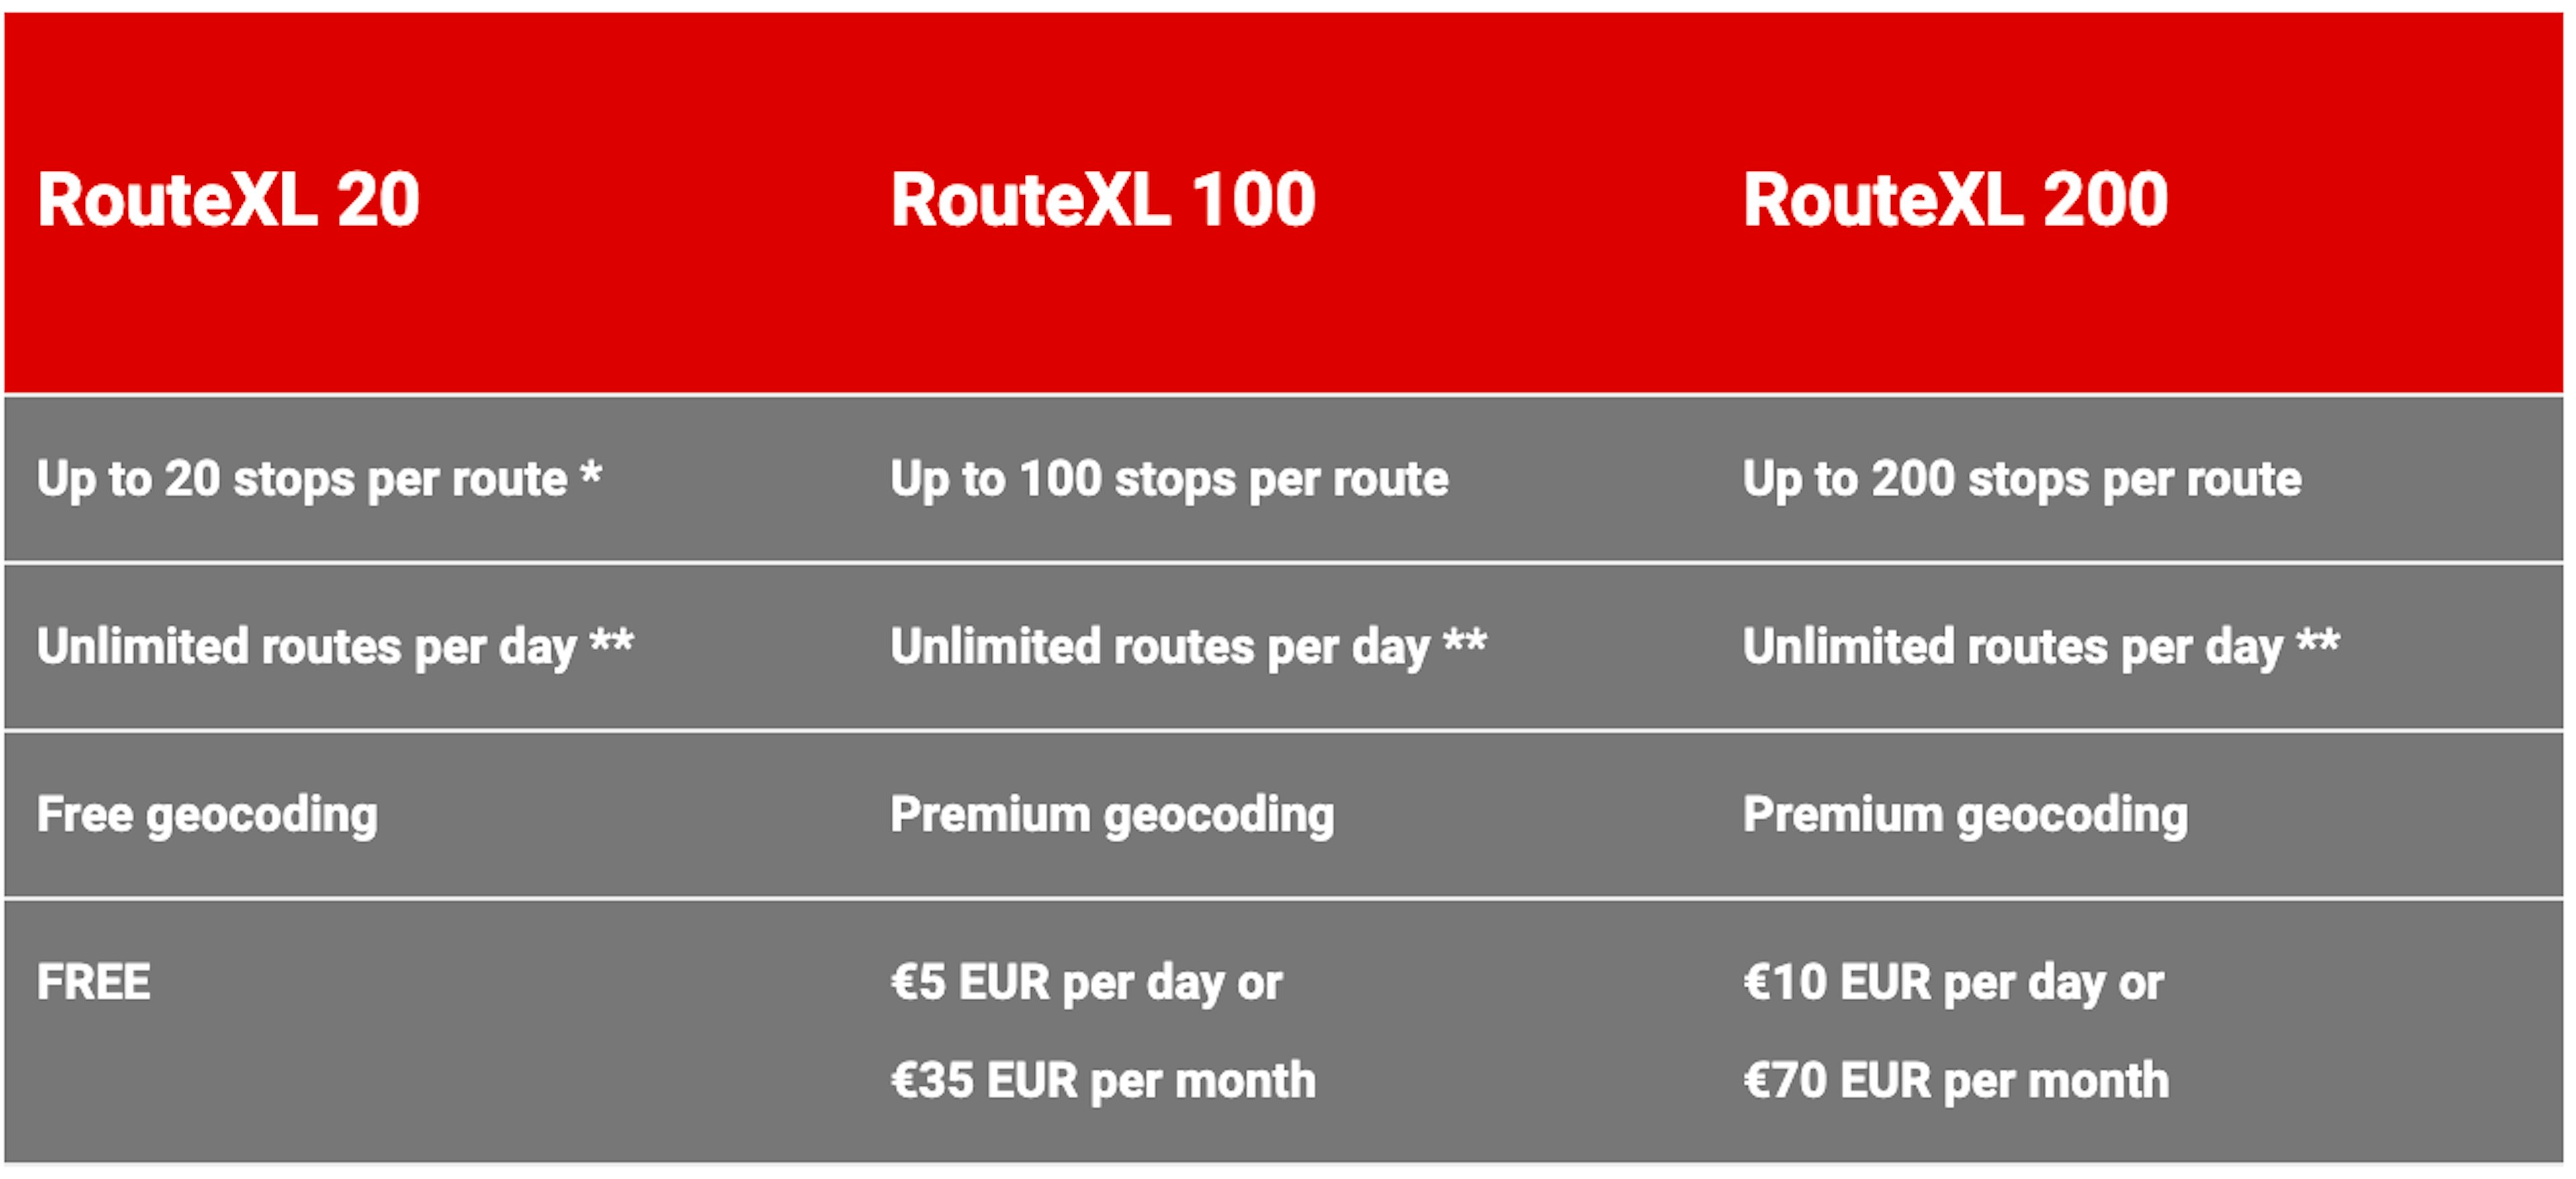 Illustration showing the different pricing plans for RouteXL